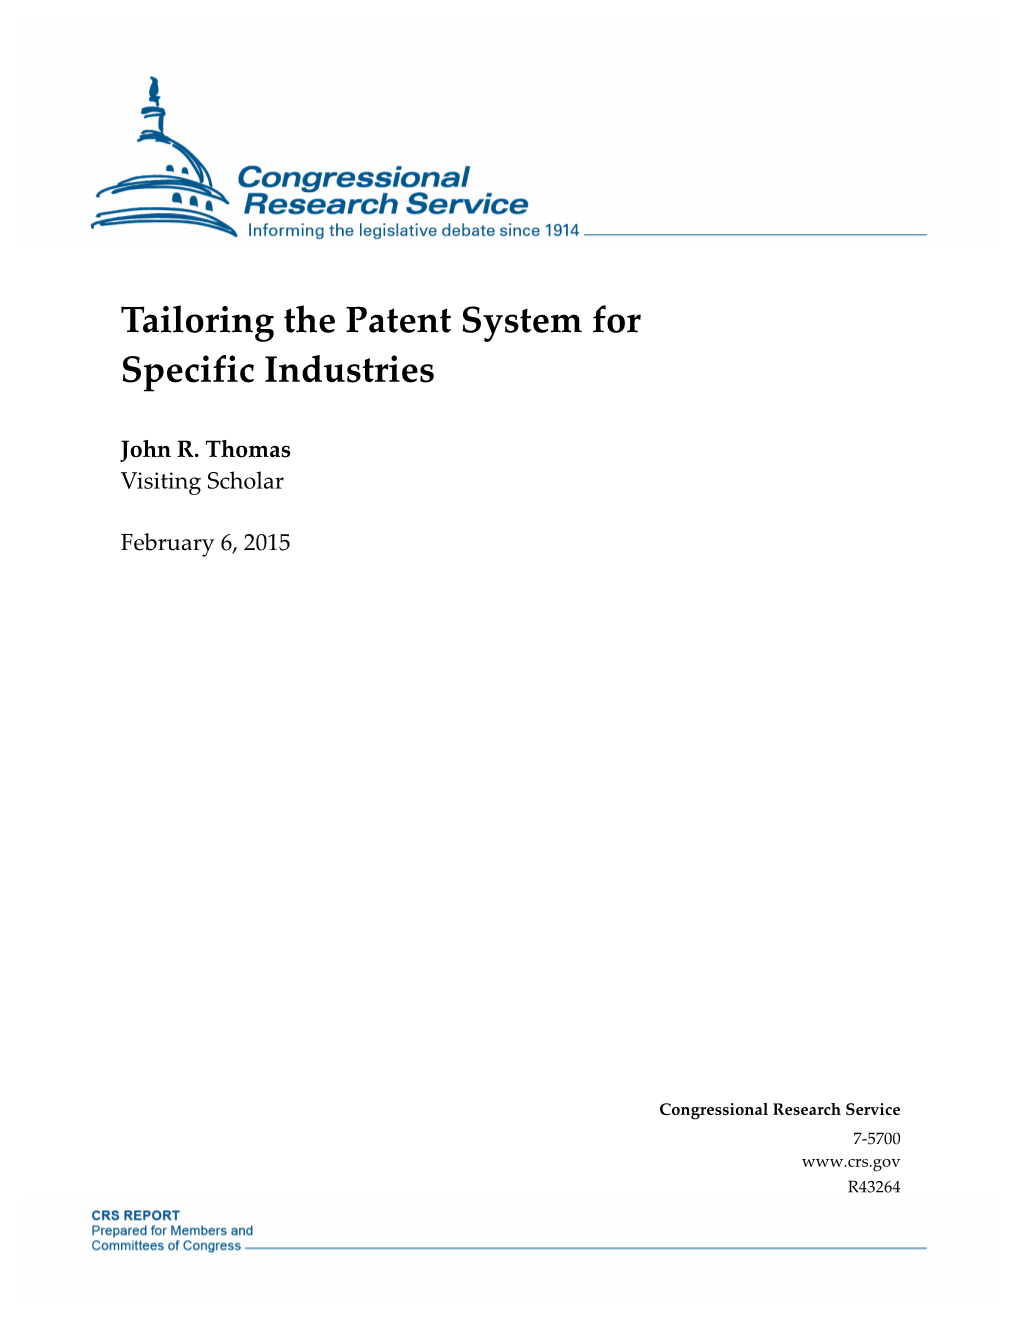 Tailoring the Patent System for Specific Industries